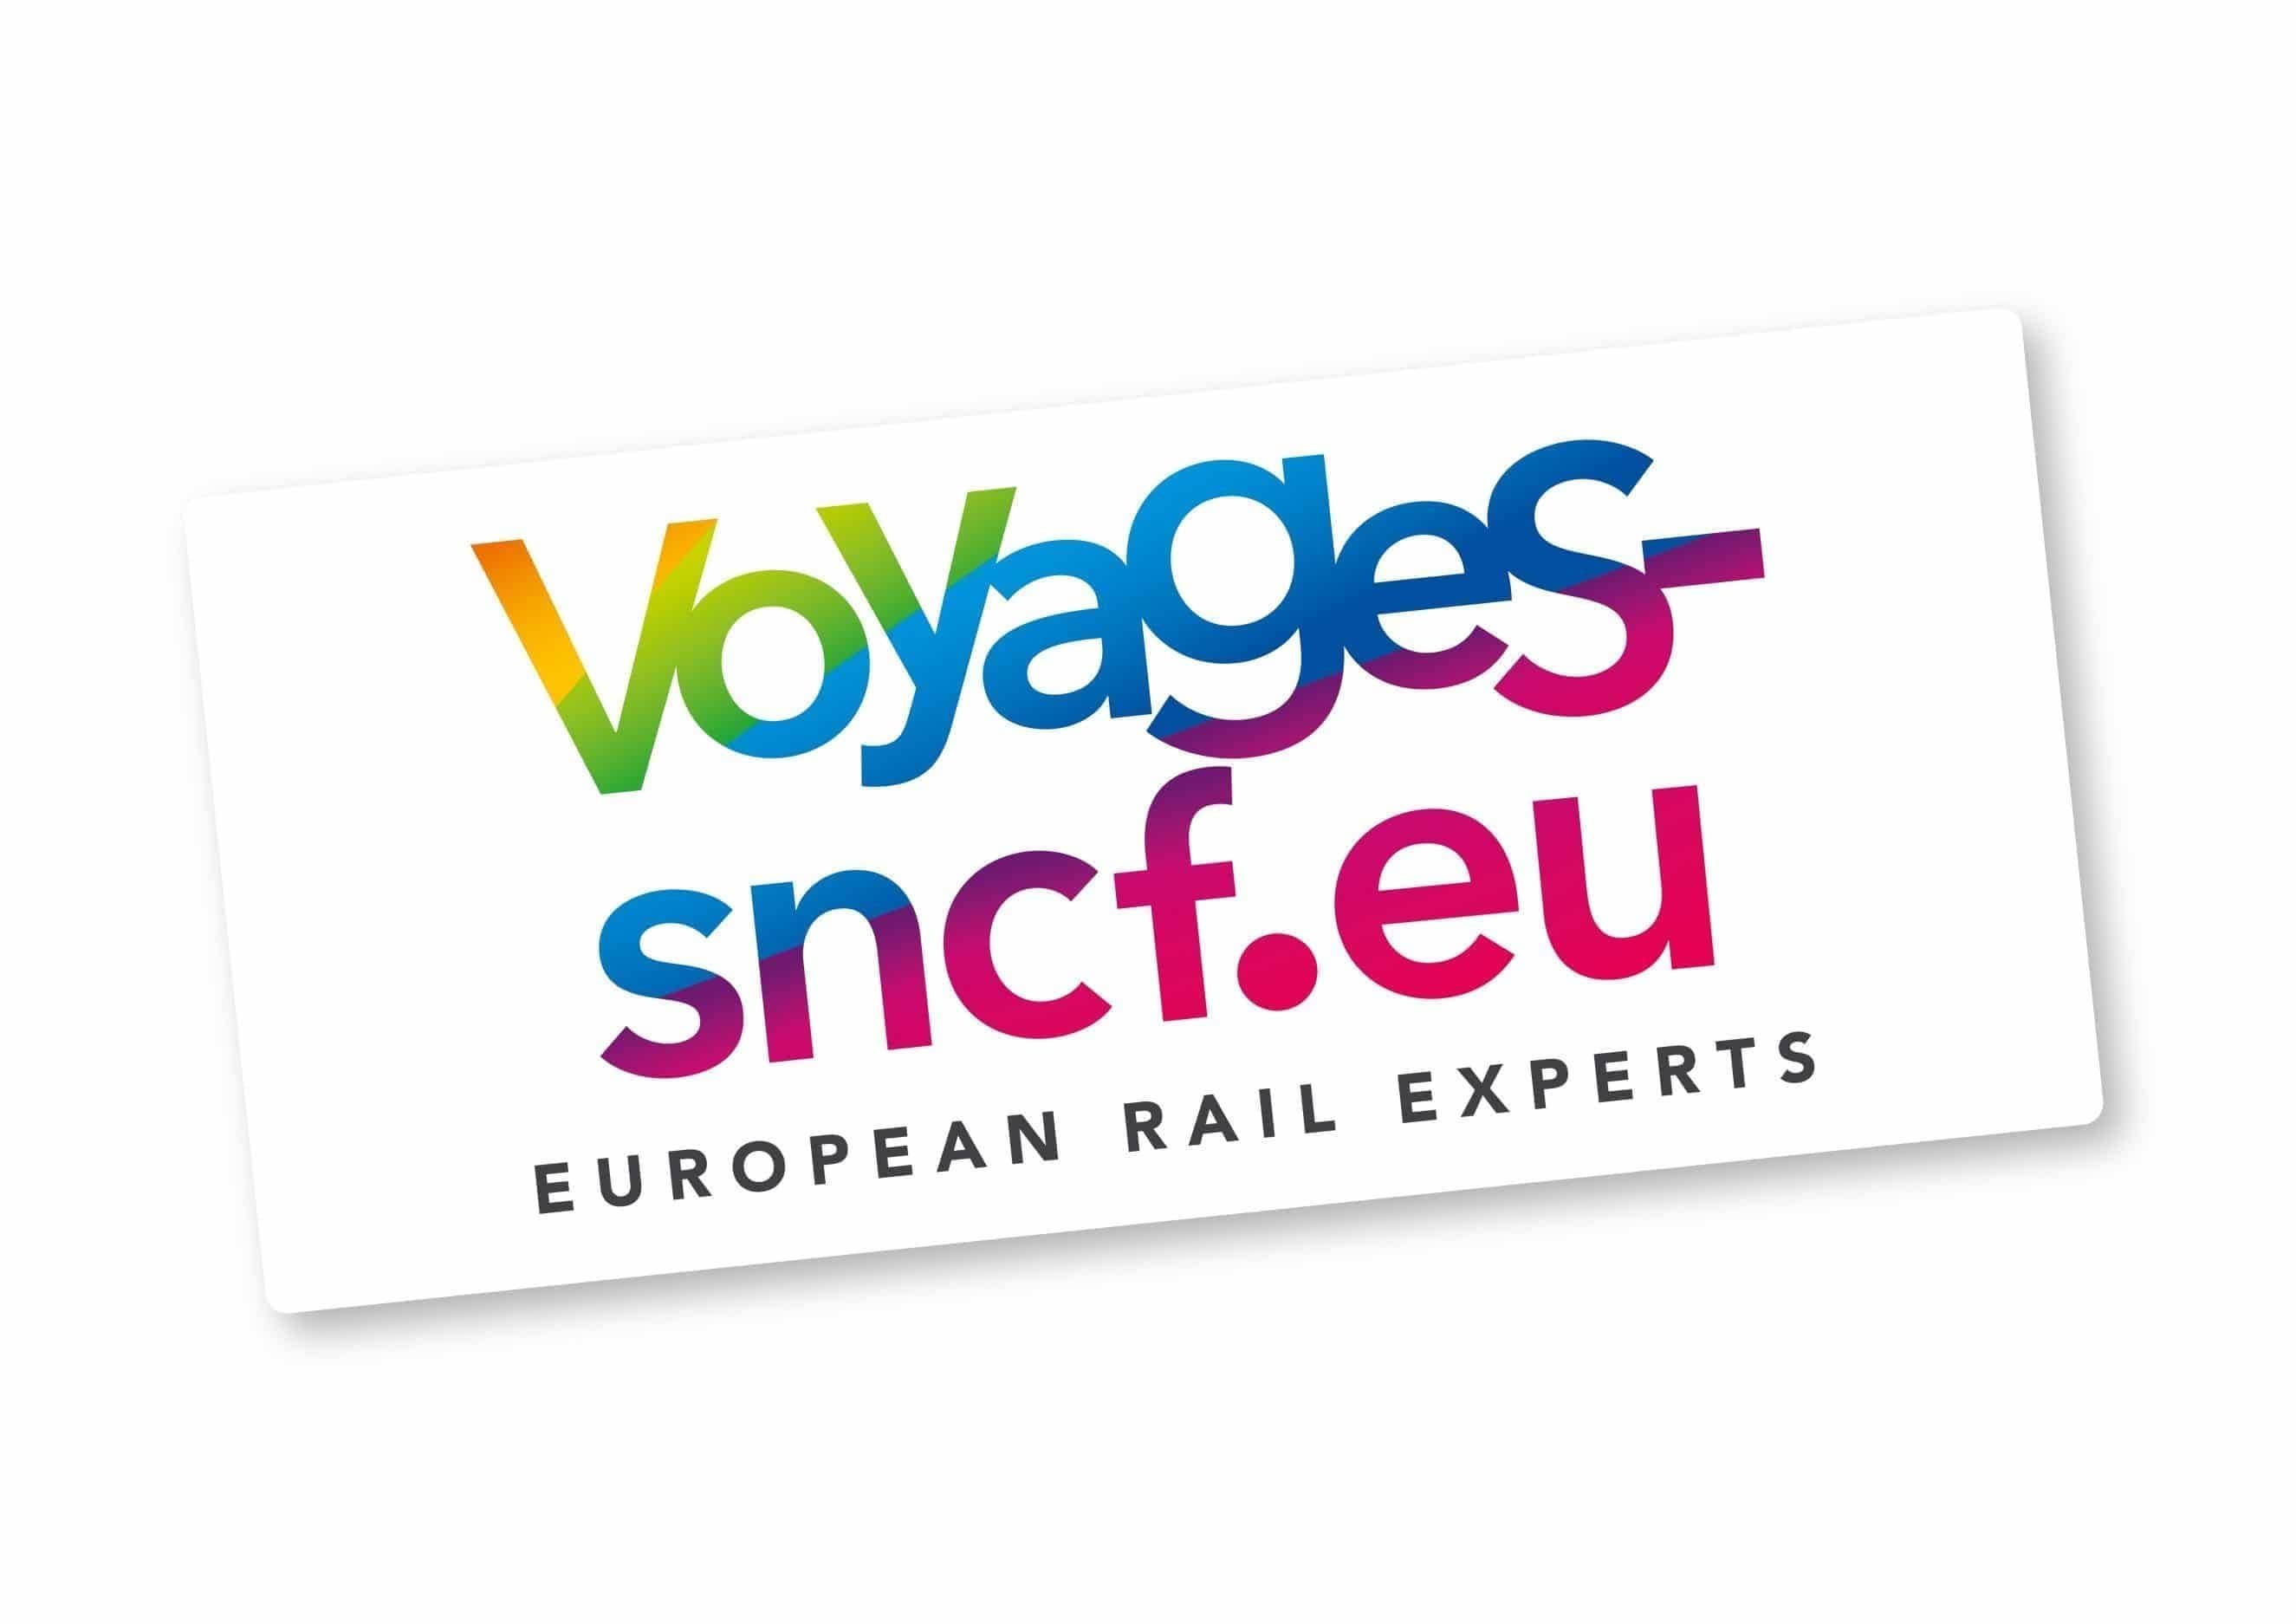 Voyages-sncf